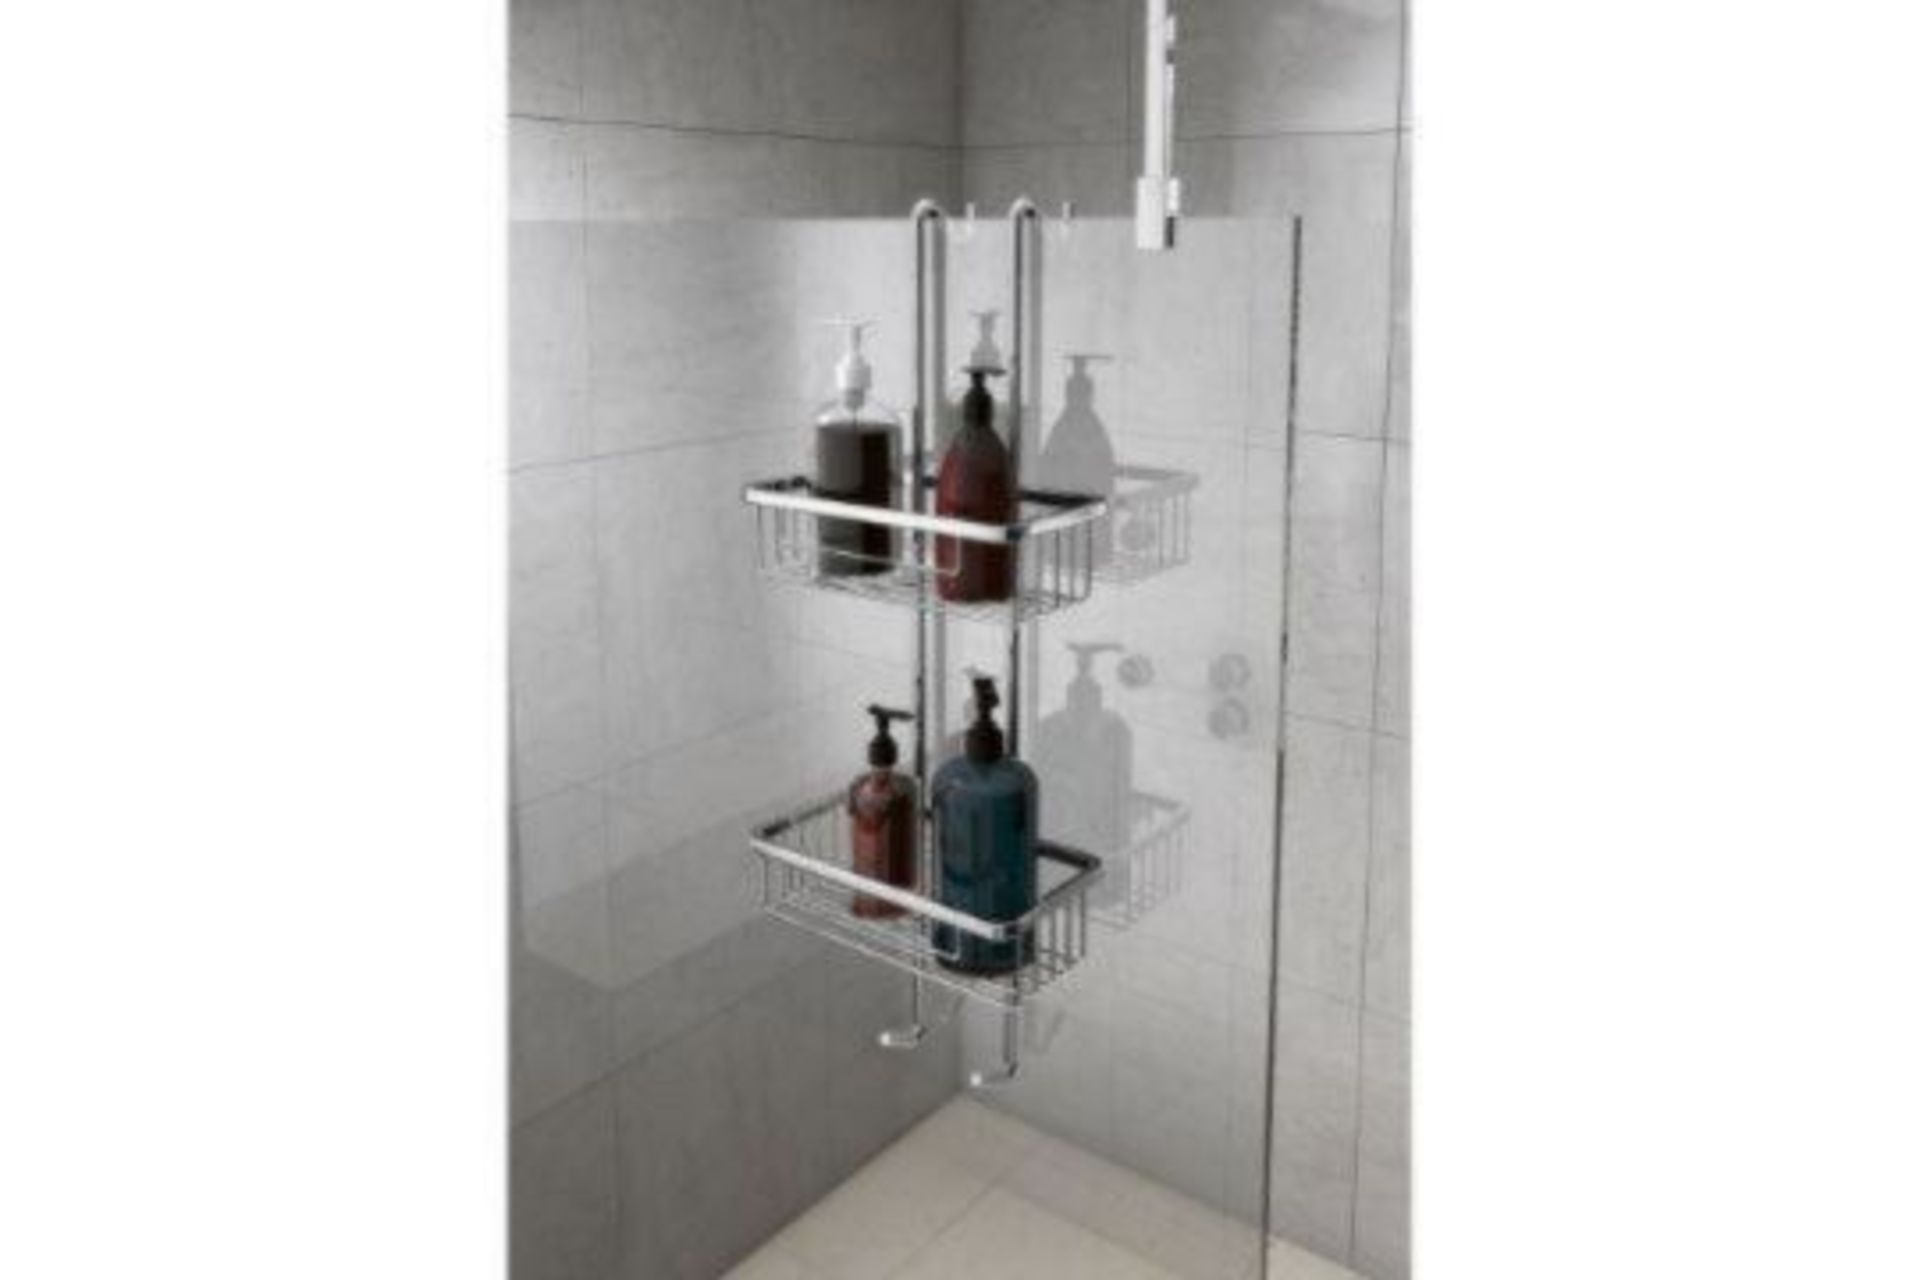 BRAND NEW CHROME DOUBLE WIRE RECTANGULAR SHOWER TIDY RRP £249 PW